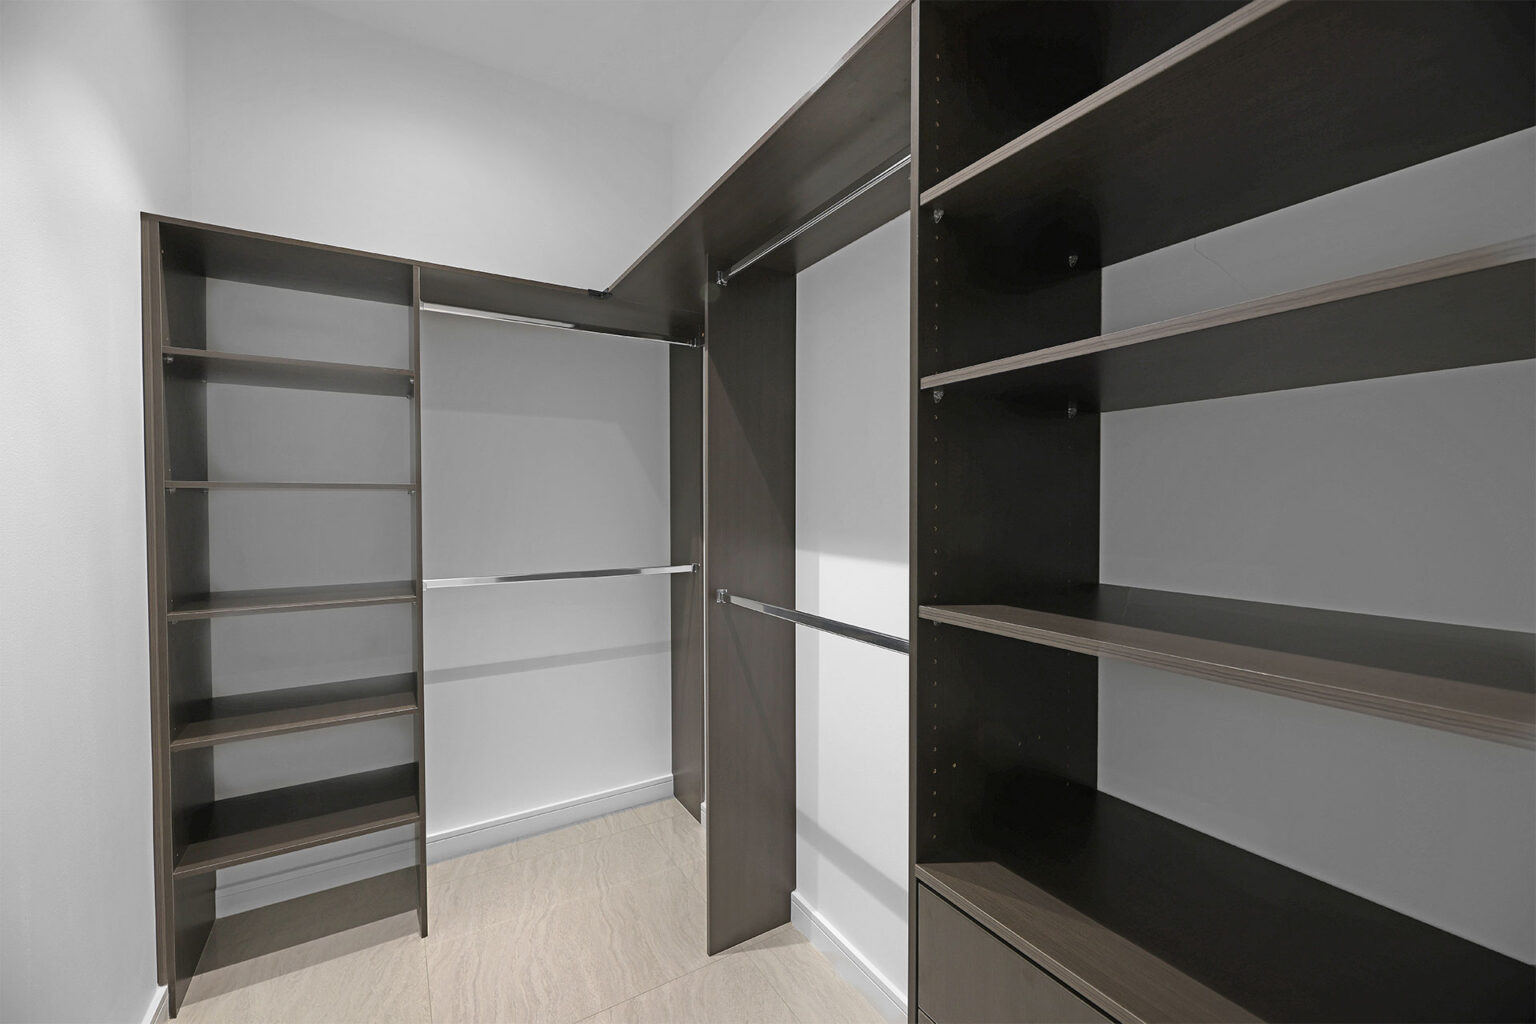 Our Projects - Star Wardrobes